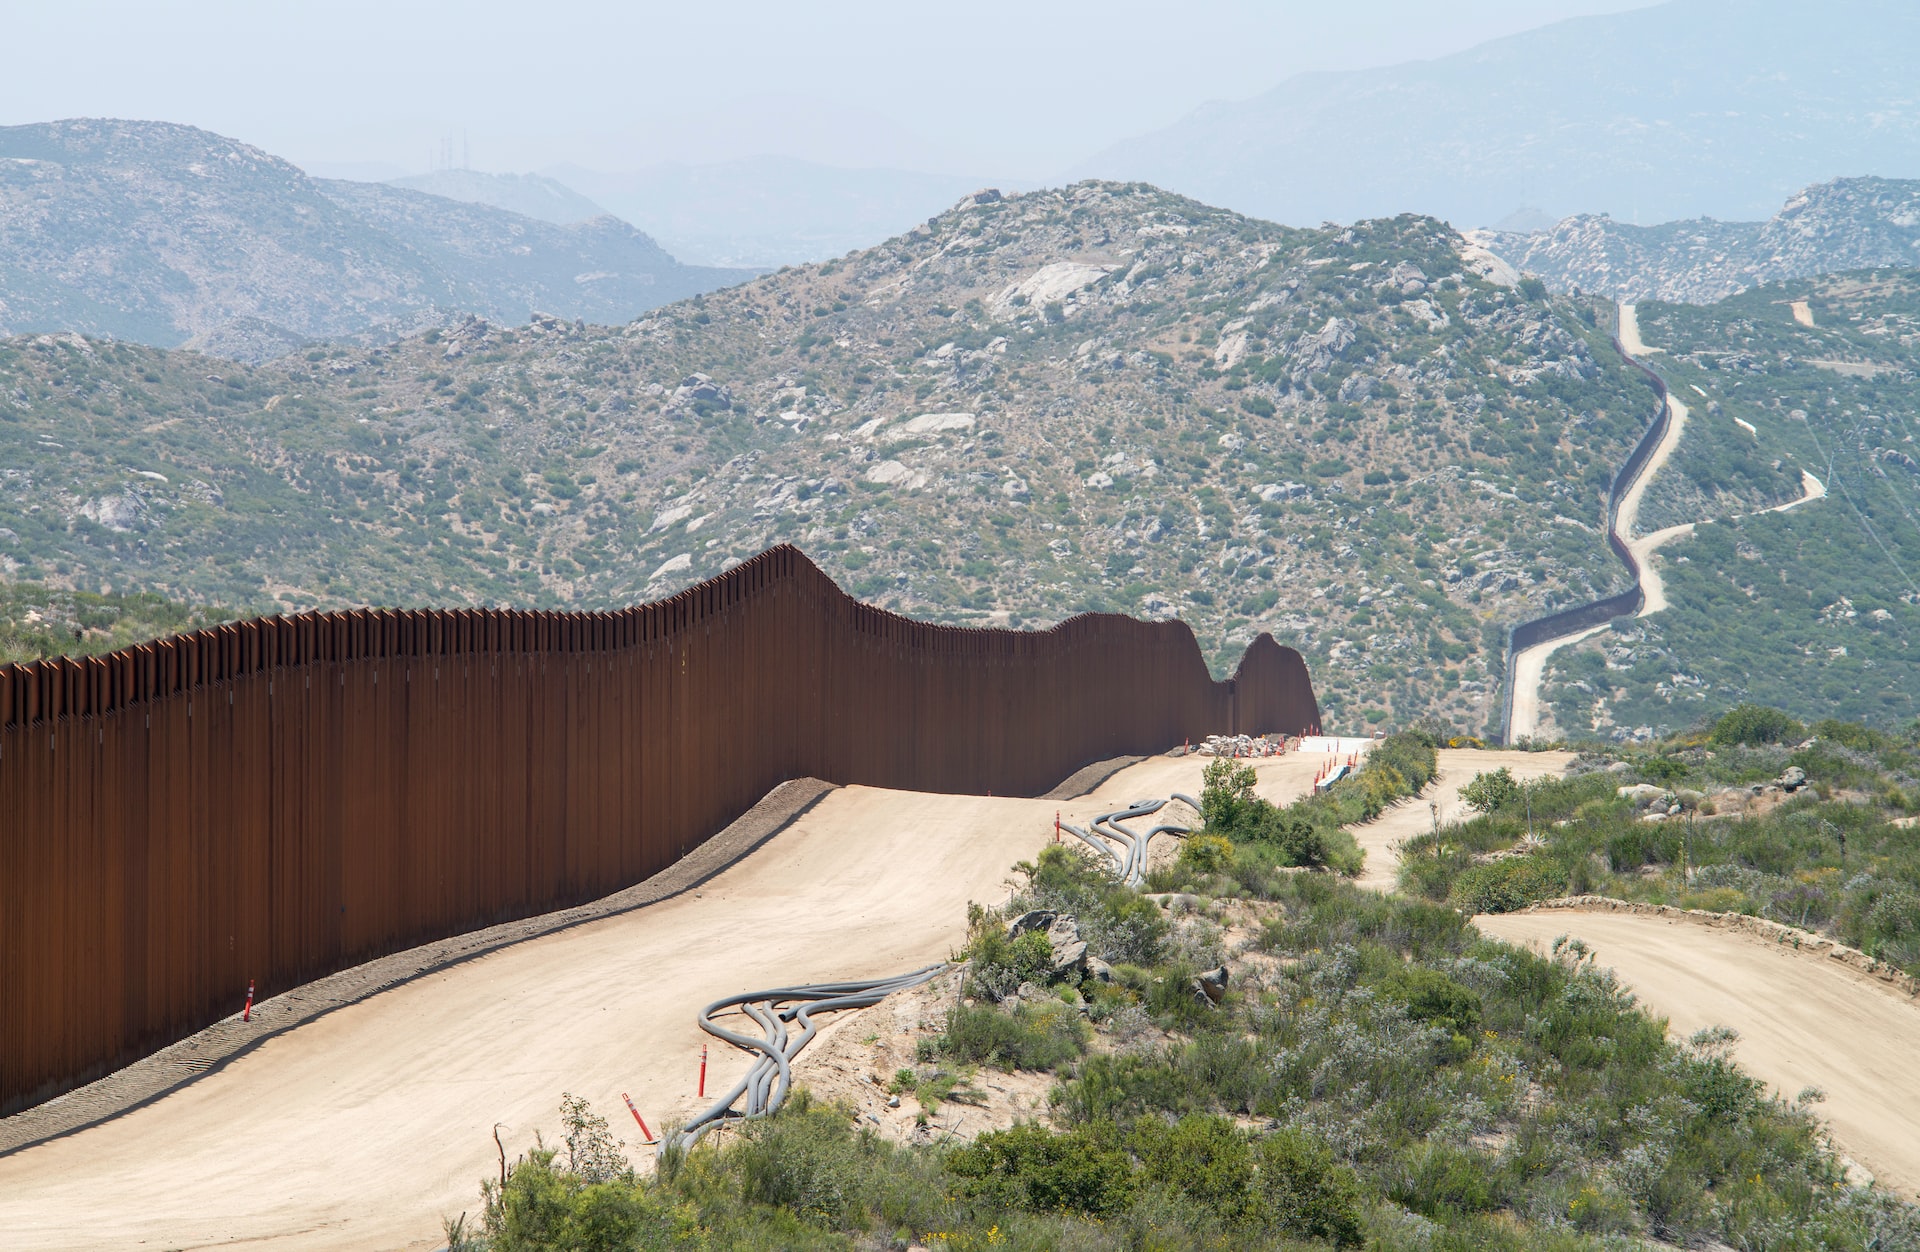 Do You Trust Democrats To Secure The Southern Border?